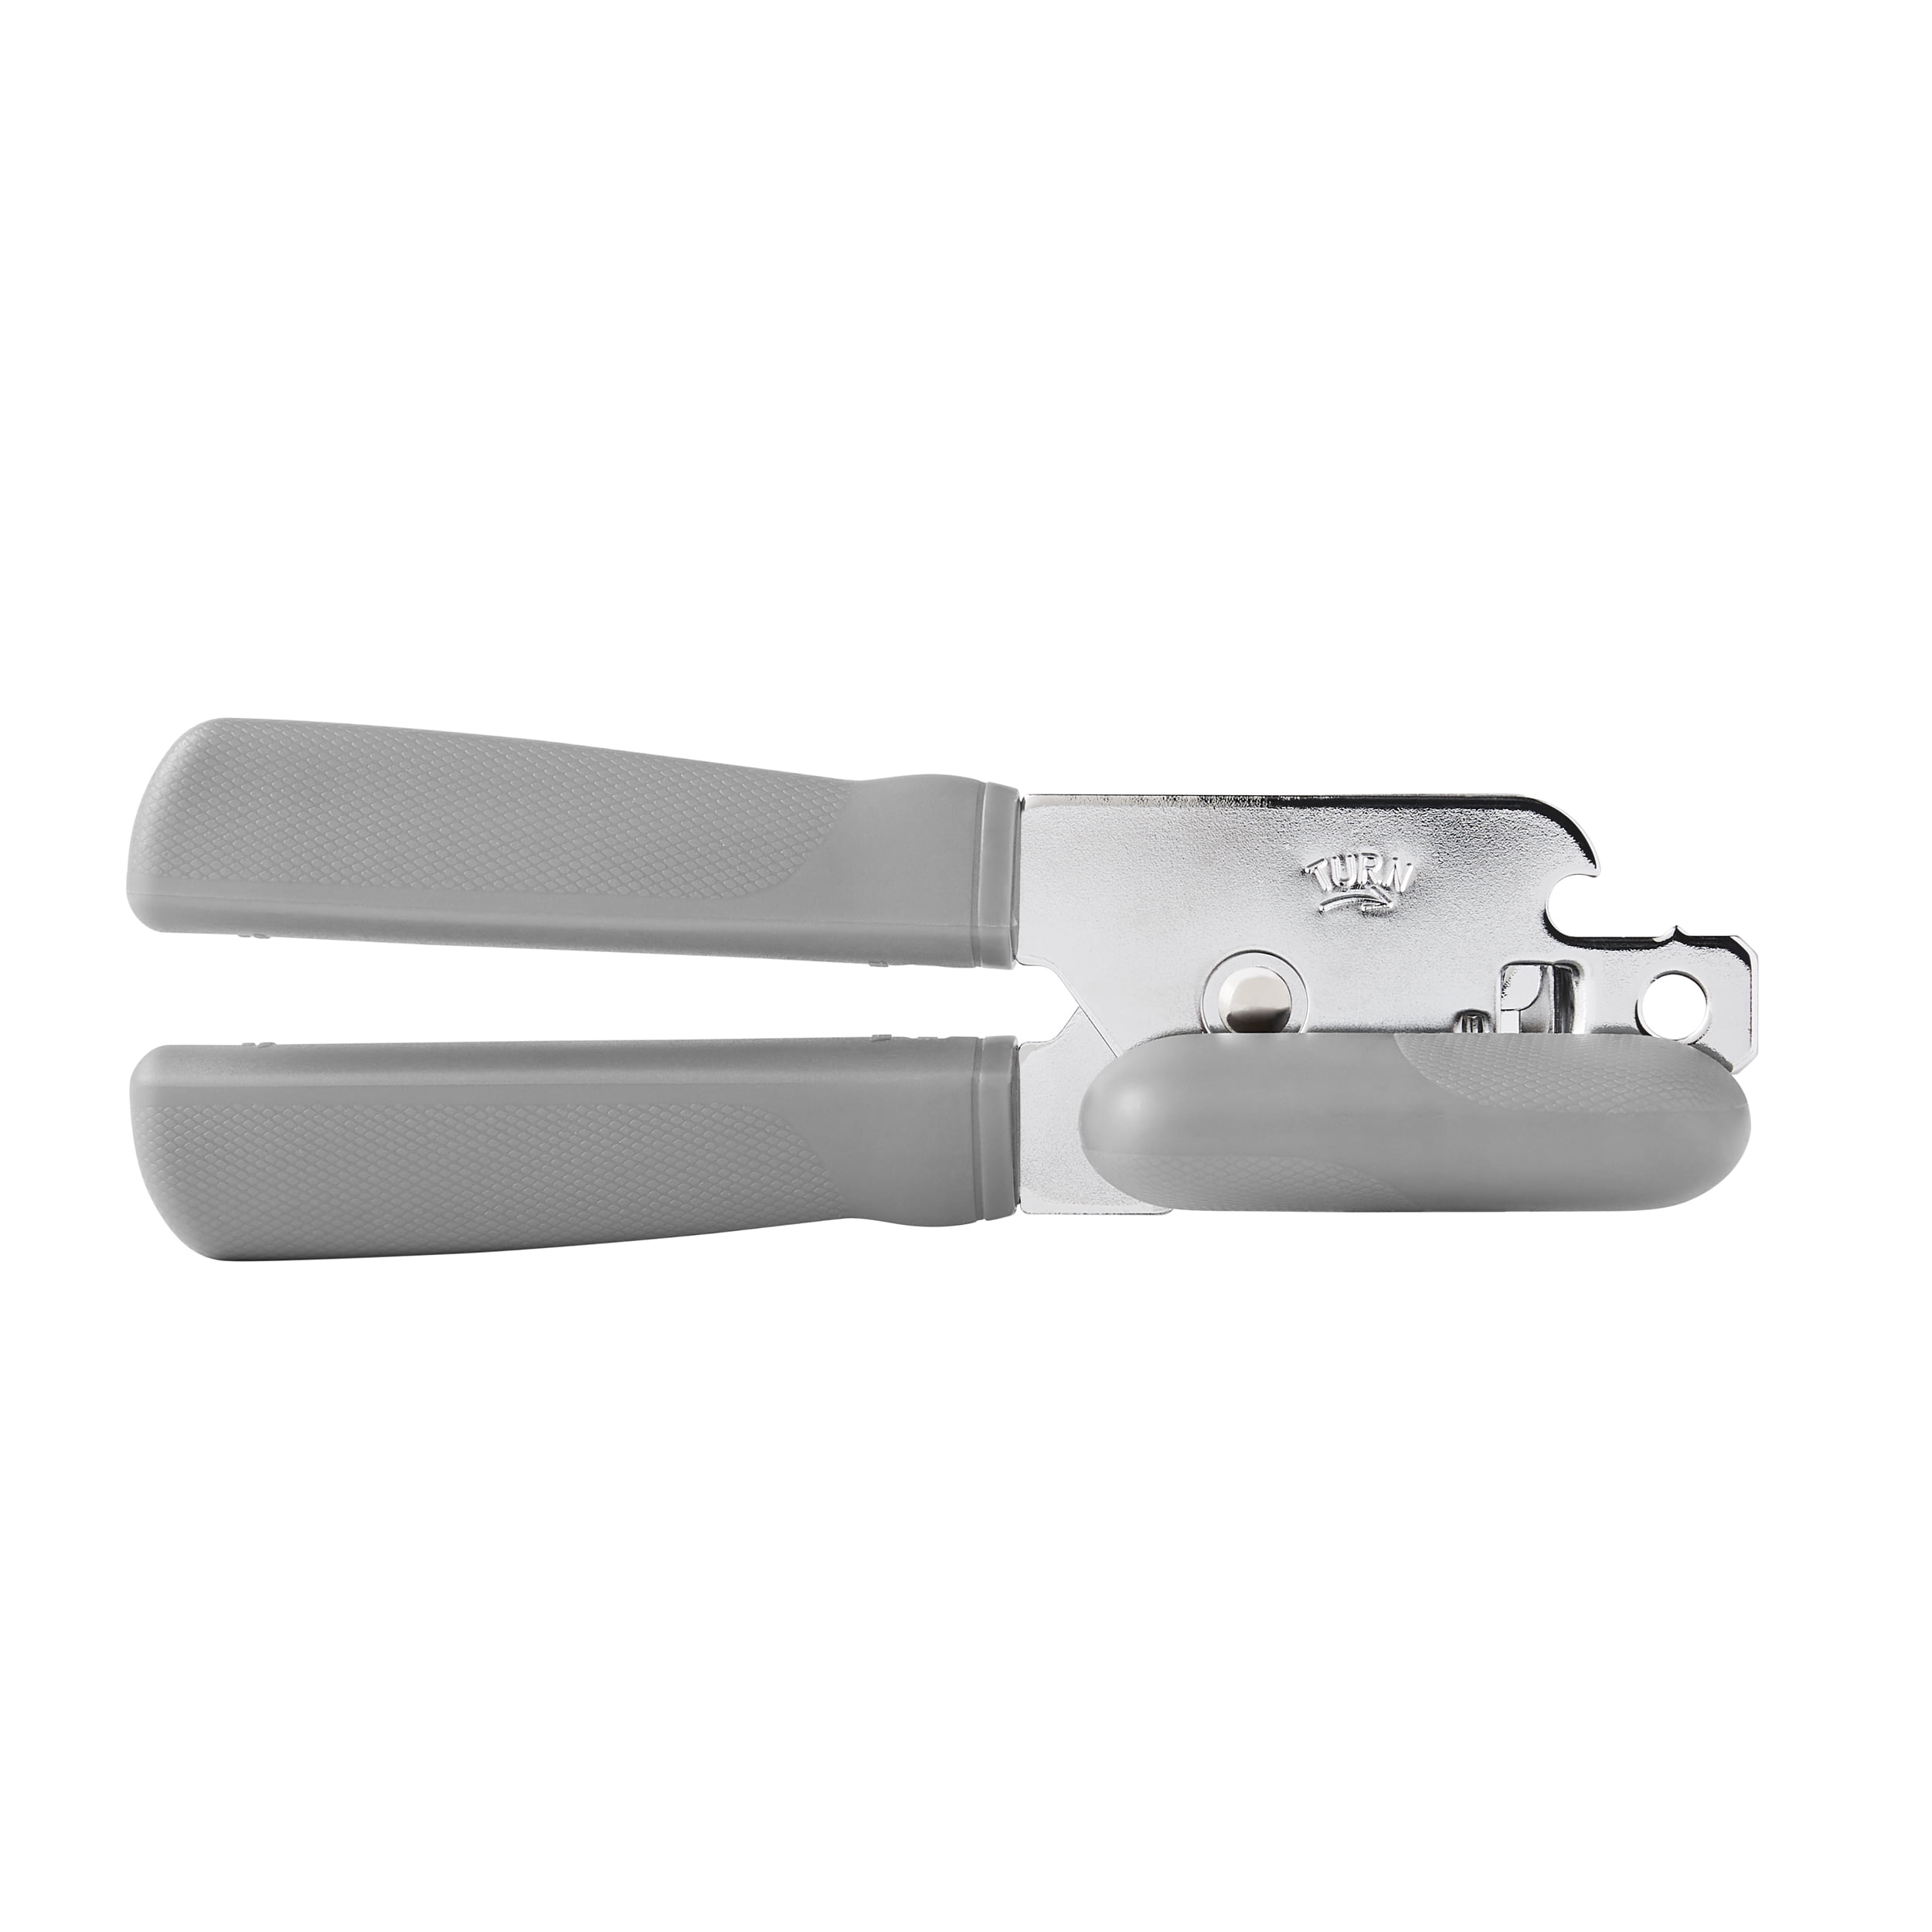 1 PCS Can Opener, Manual Can Opener with Durable Stainless Steel